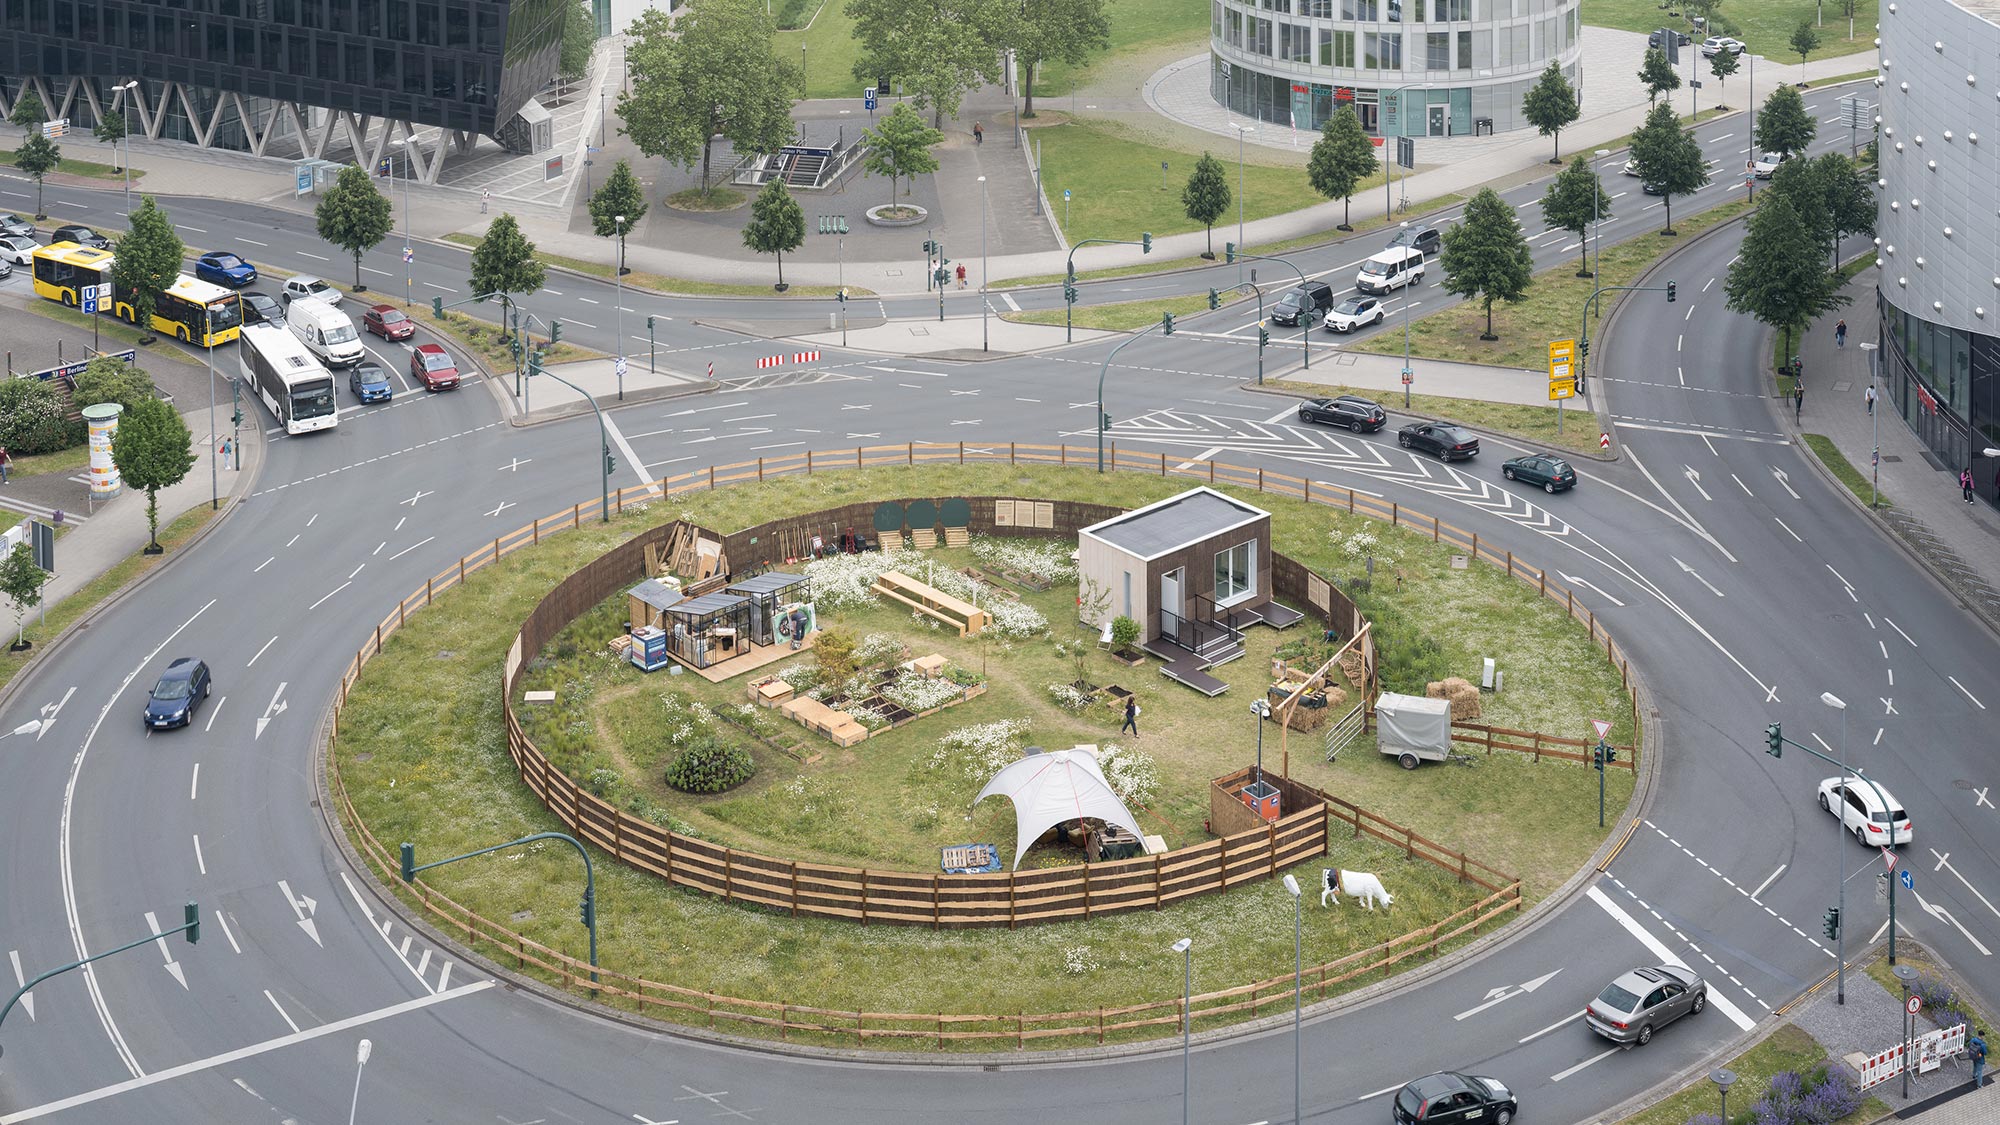 First prototype of ADPT exhibited at Berliner Platz in Essen as part of the "Eco-Village" project.